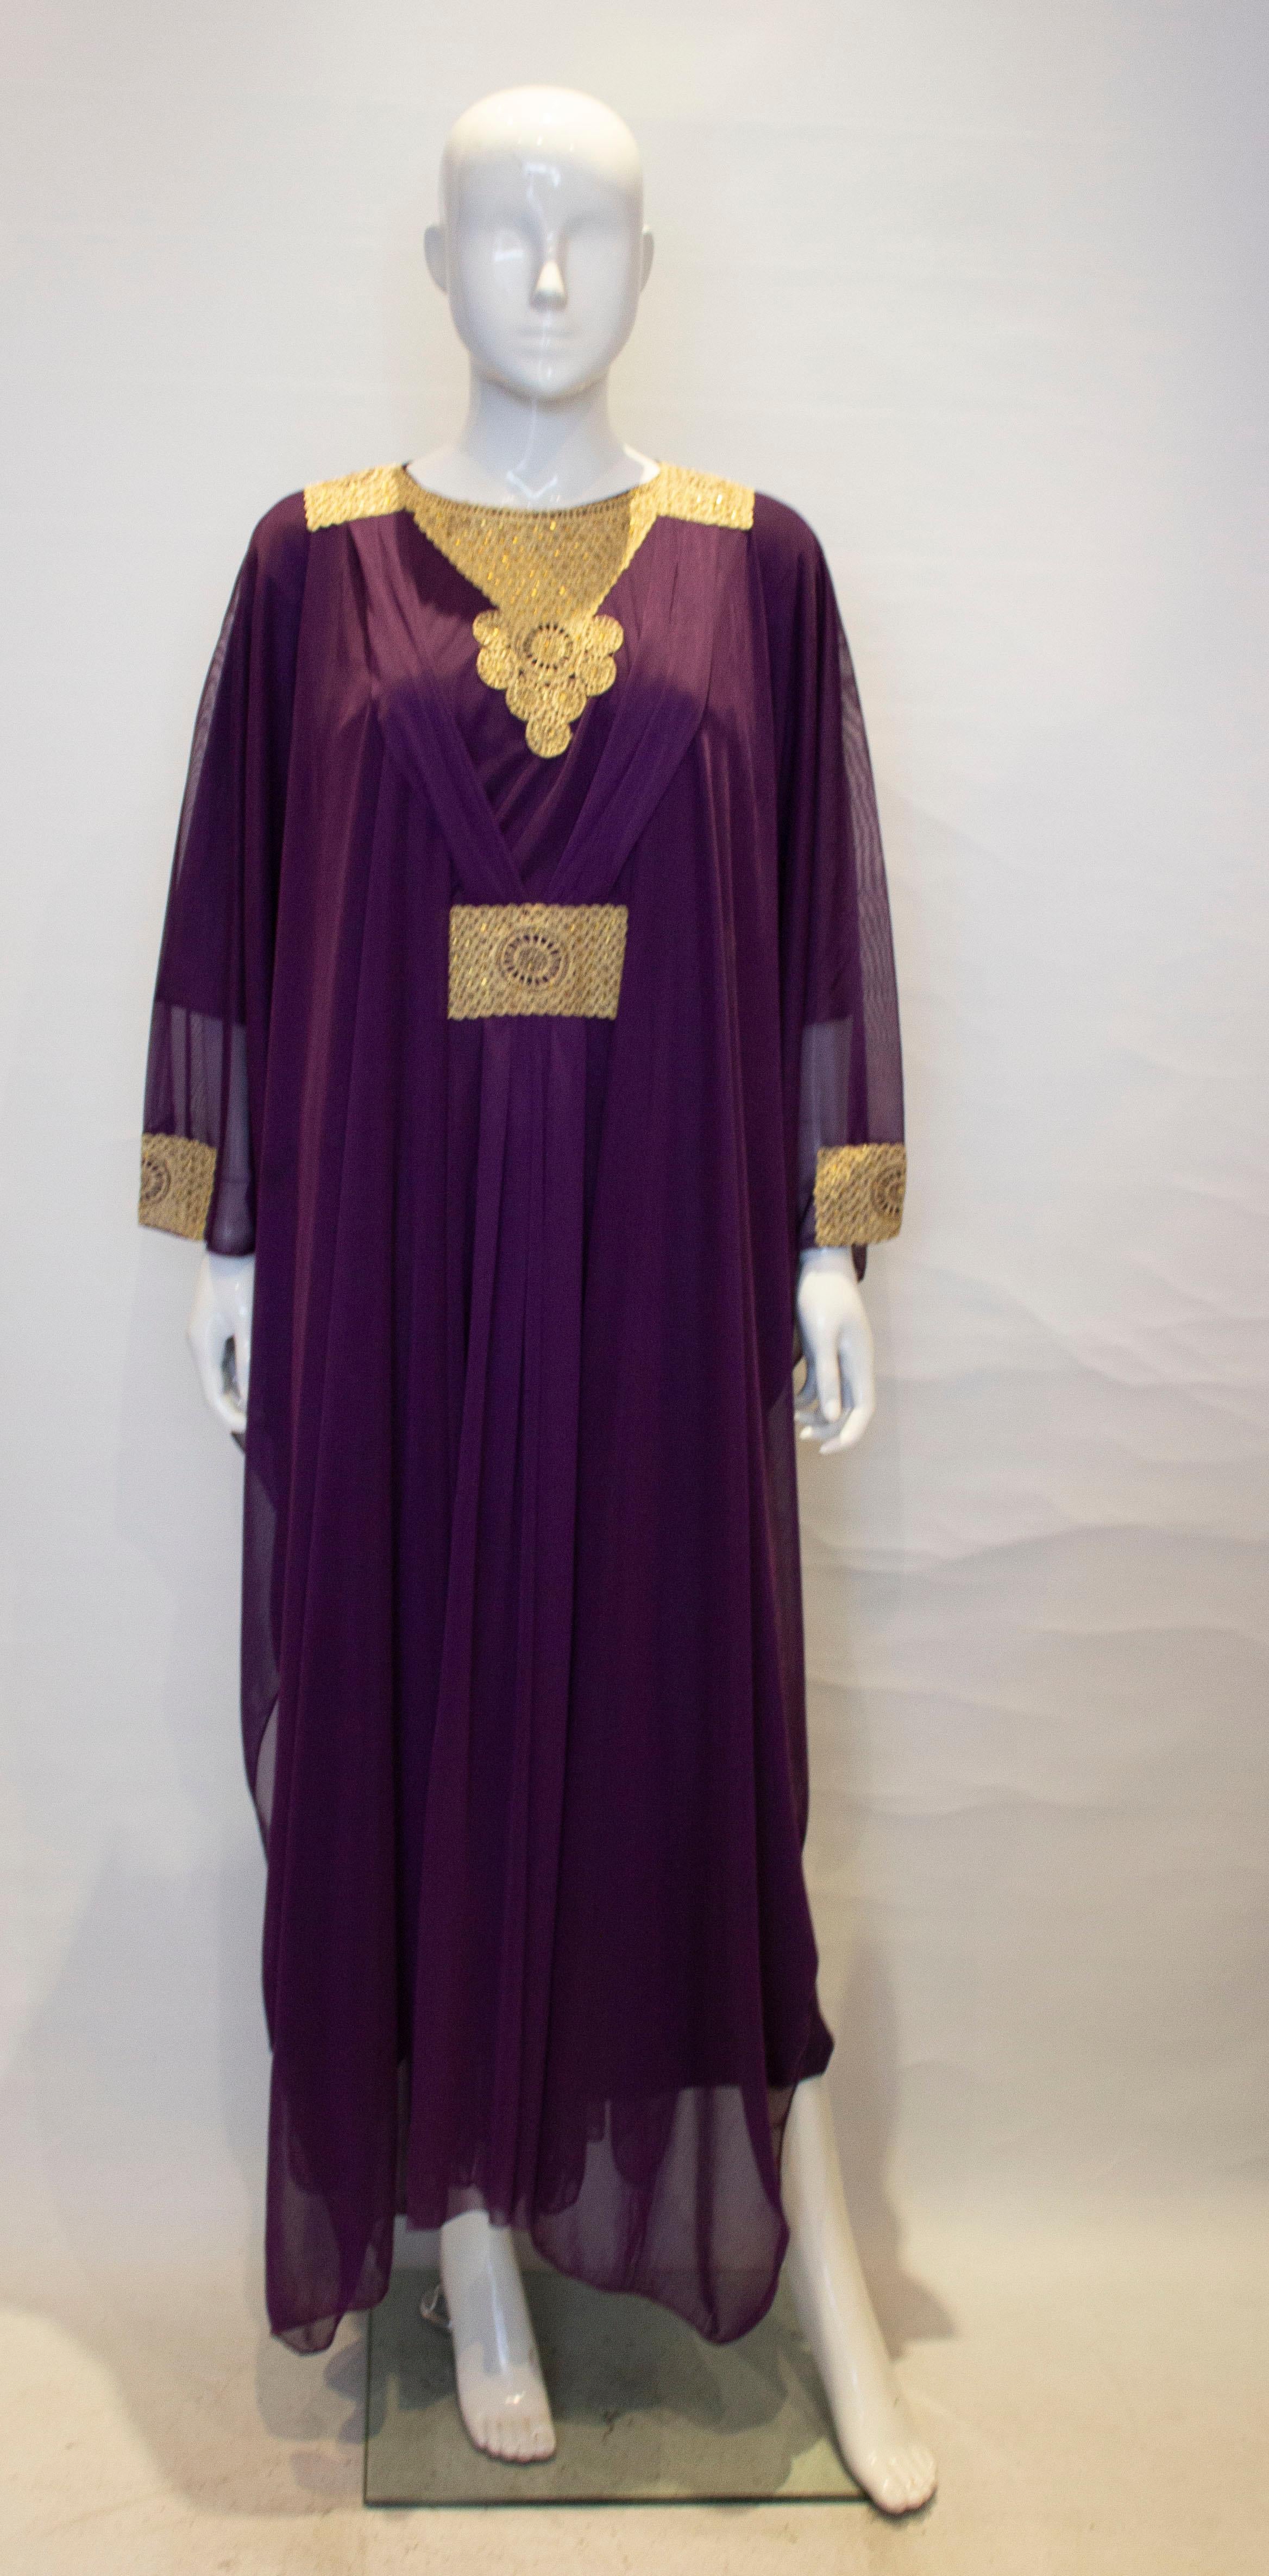 A headturning vintage purple and gold kaftan. The kaftan has two layers, and inner column and the outer flowing kaftan. It has gold trim on the front , back and cuffs, and pleats on the shoulder. 